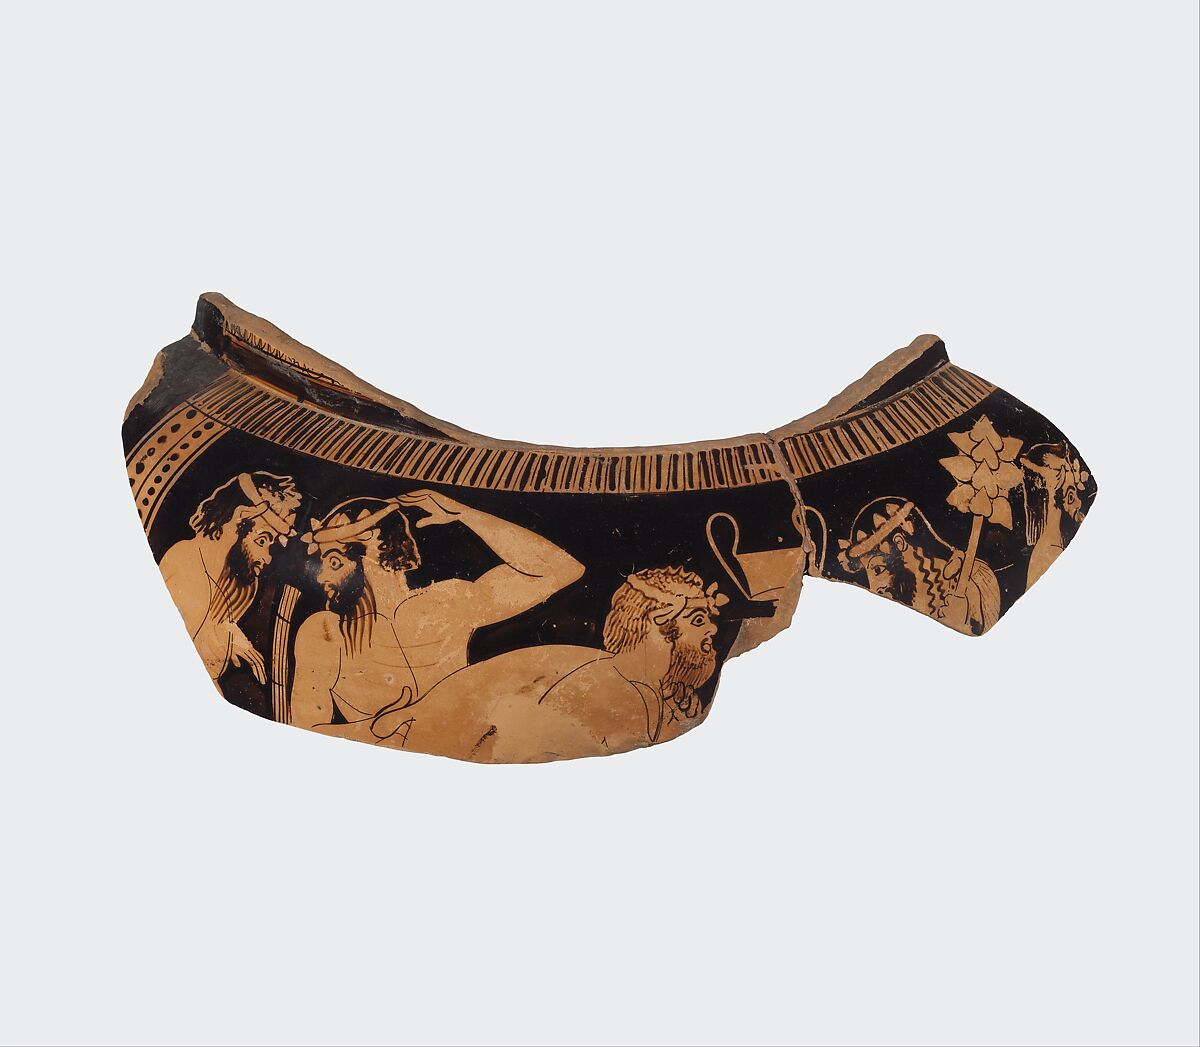 Fragment of a terracotta column-krater (mixing bowl for wine and water), Attributed to the Florence Painter, Terracotta, Greek, Attic 